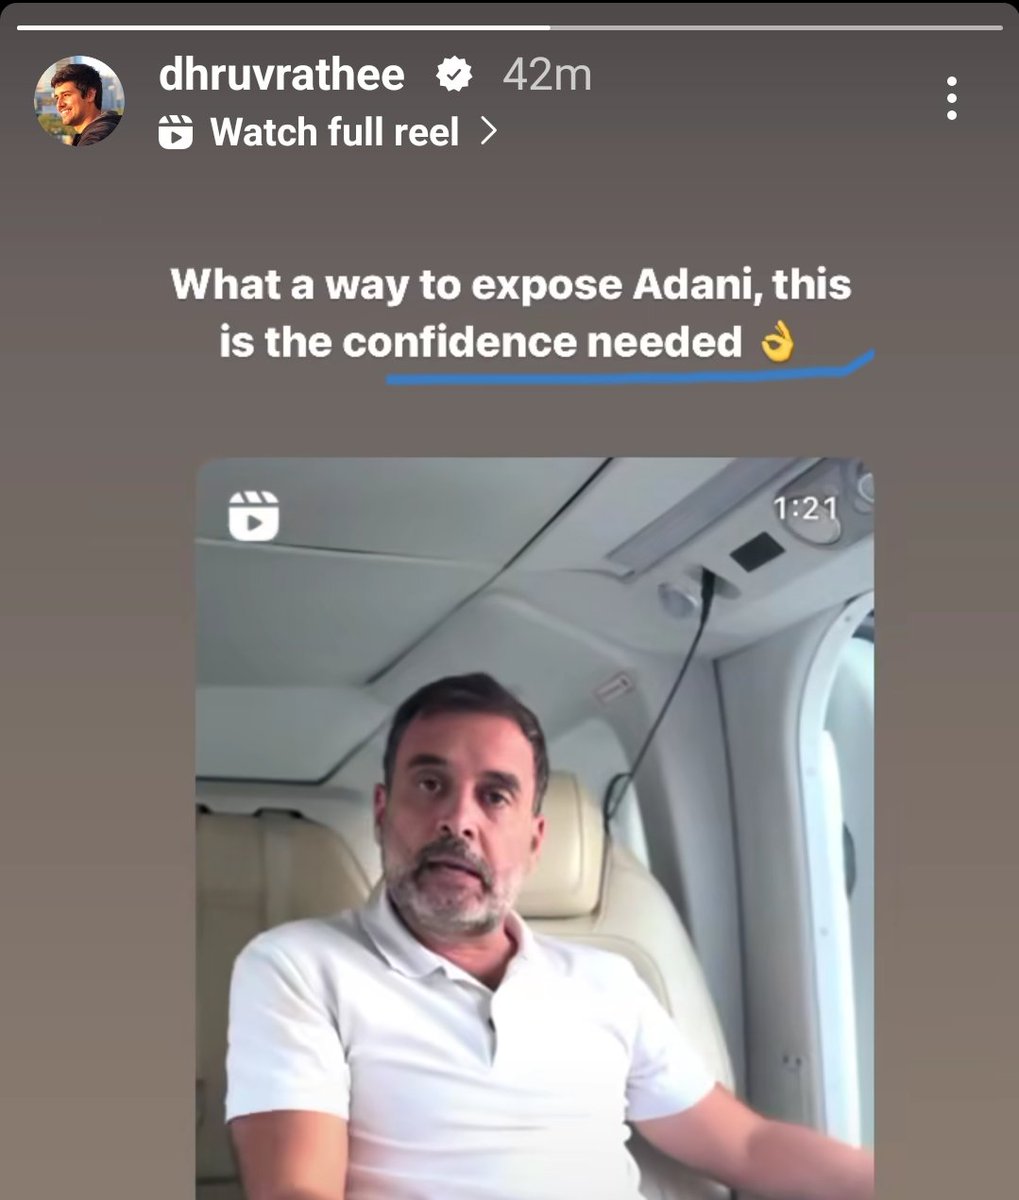 BIG BREAKING Dhruv Rathee has shared Rahul Gandhi video in which he exposed Narendra Modi and Adani for privatising Airports. That reel going viral. 'This is the confidence needed' 🔥 #DhruvRathee